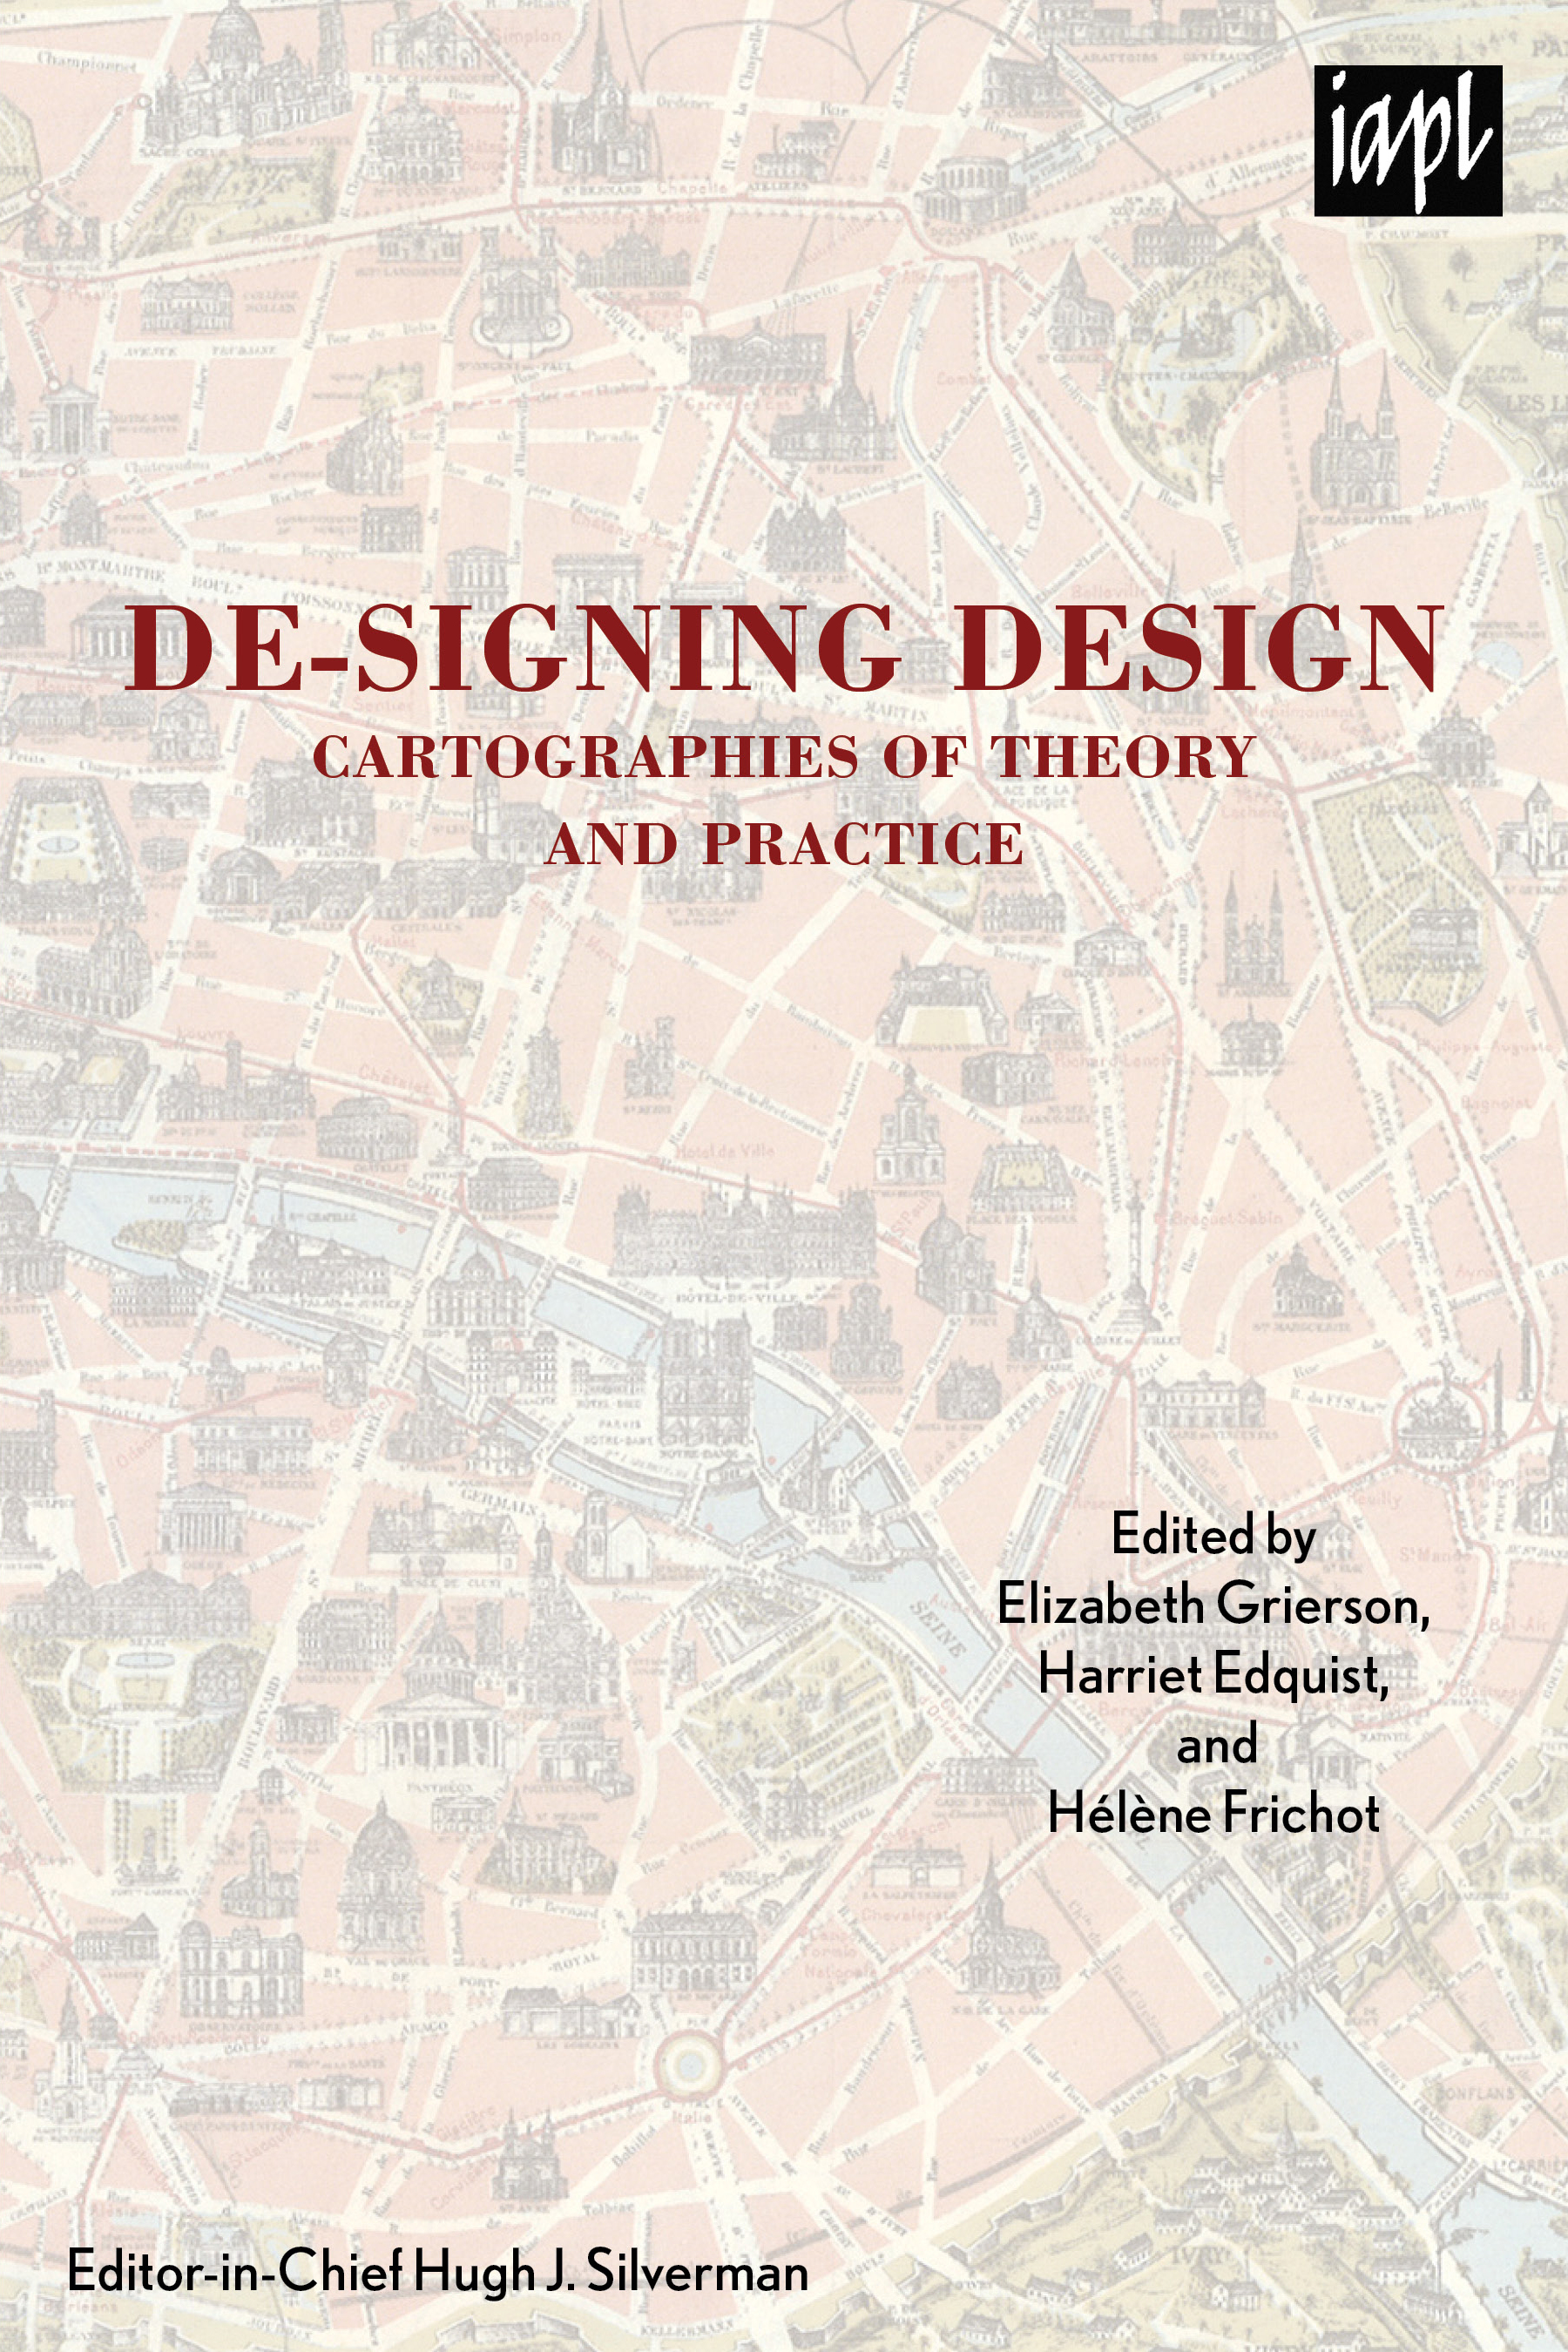 De-signing Design: Cartographies of Theory and Practice